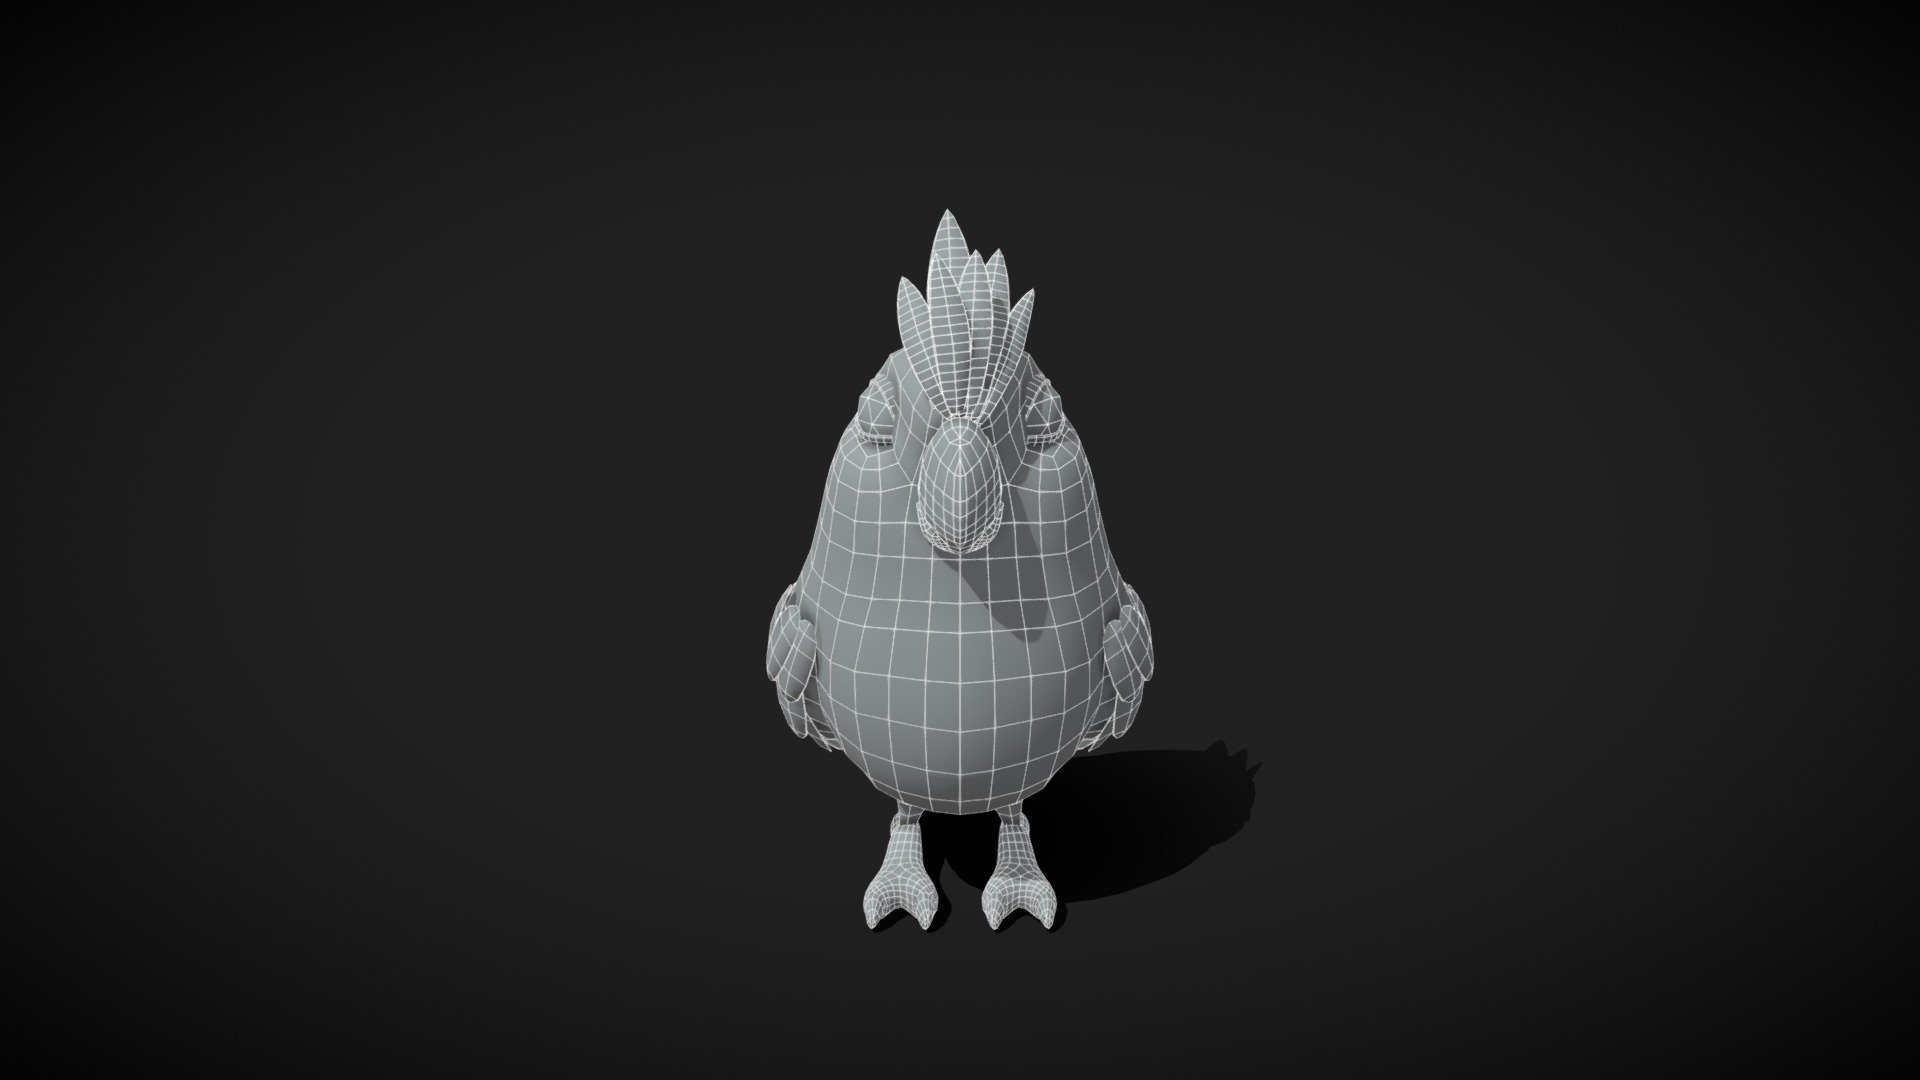 Cartoon Parrot Bird Base Mesh 3D Model  is completely ready to be used as a starting point to develop your cartoon parrot-like birds.

Good topology ready for animation.

Technical details:




File formats included in the package are: FBX, OBJ, GLB, ABC, DAE, PLY, STL, x3d, BLEND, gLTF (generated), USDZ (generated)

Native software file format: BLEND

Polygons: 4,828

Vertices: 5,192

Blender scene included.
 - Cartoon Parrot Bird Base Mesh 3D Model - Buy Royalty Free 3D model by 3DDisco 3d model